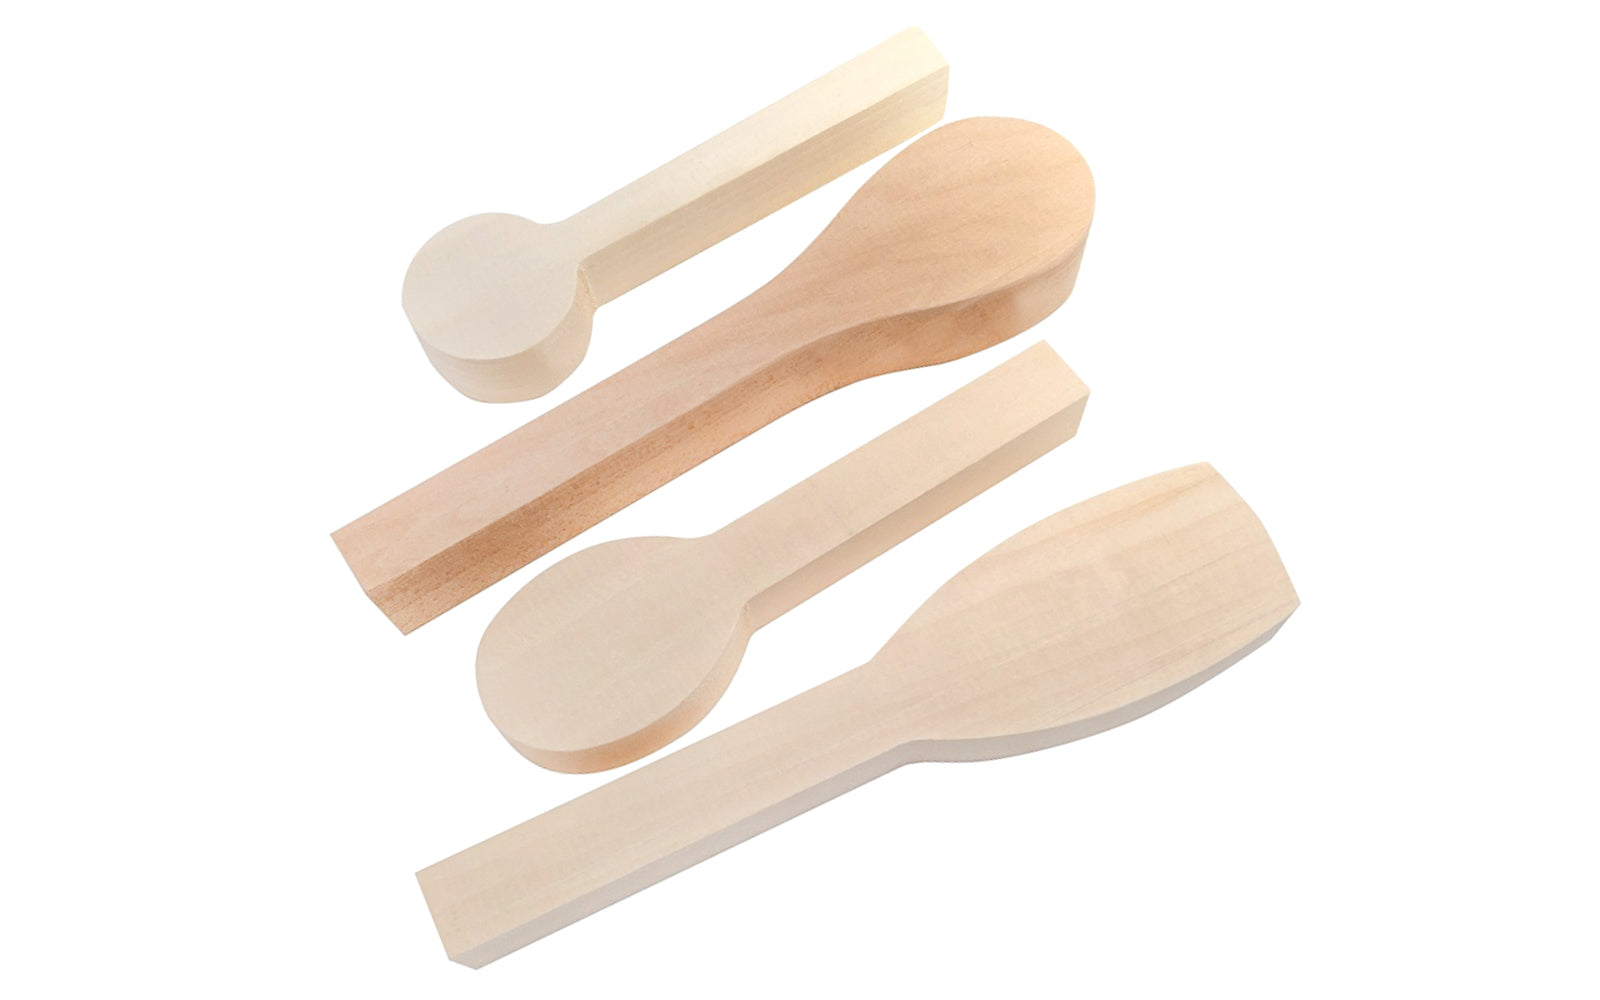 A special  4-piece wooden spoon blank set made of Basswood. These spoon blanksare ready to go for beginners or carving pros interested in spoon carving.  Sizes included: 9-3/4" long x 1" thick, 7-1/2" long x 1" thick, 10" long x 1-1/4" thick, 7-3/4" long x 1" thick.  Made by Flexcut. Model SKSB4.  Made in USA ~ 651646210041